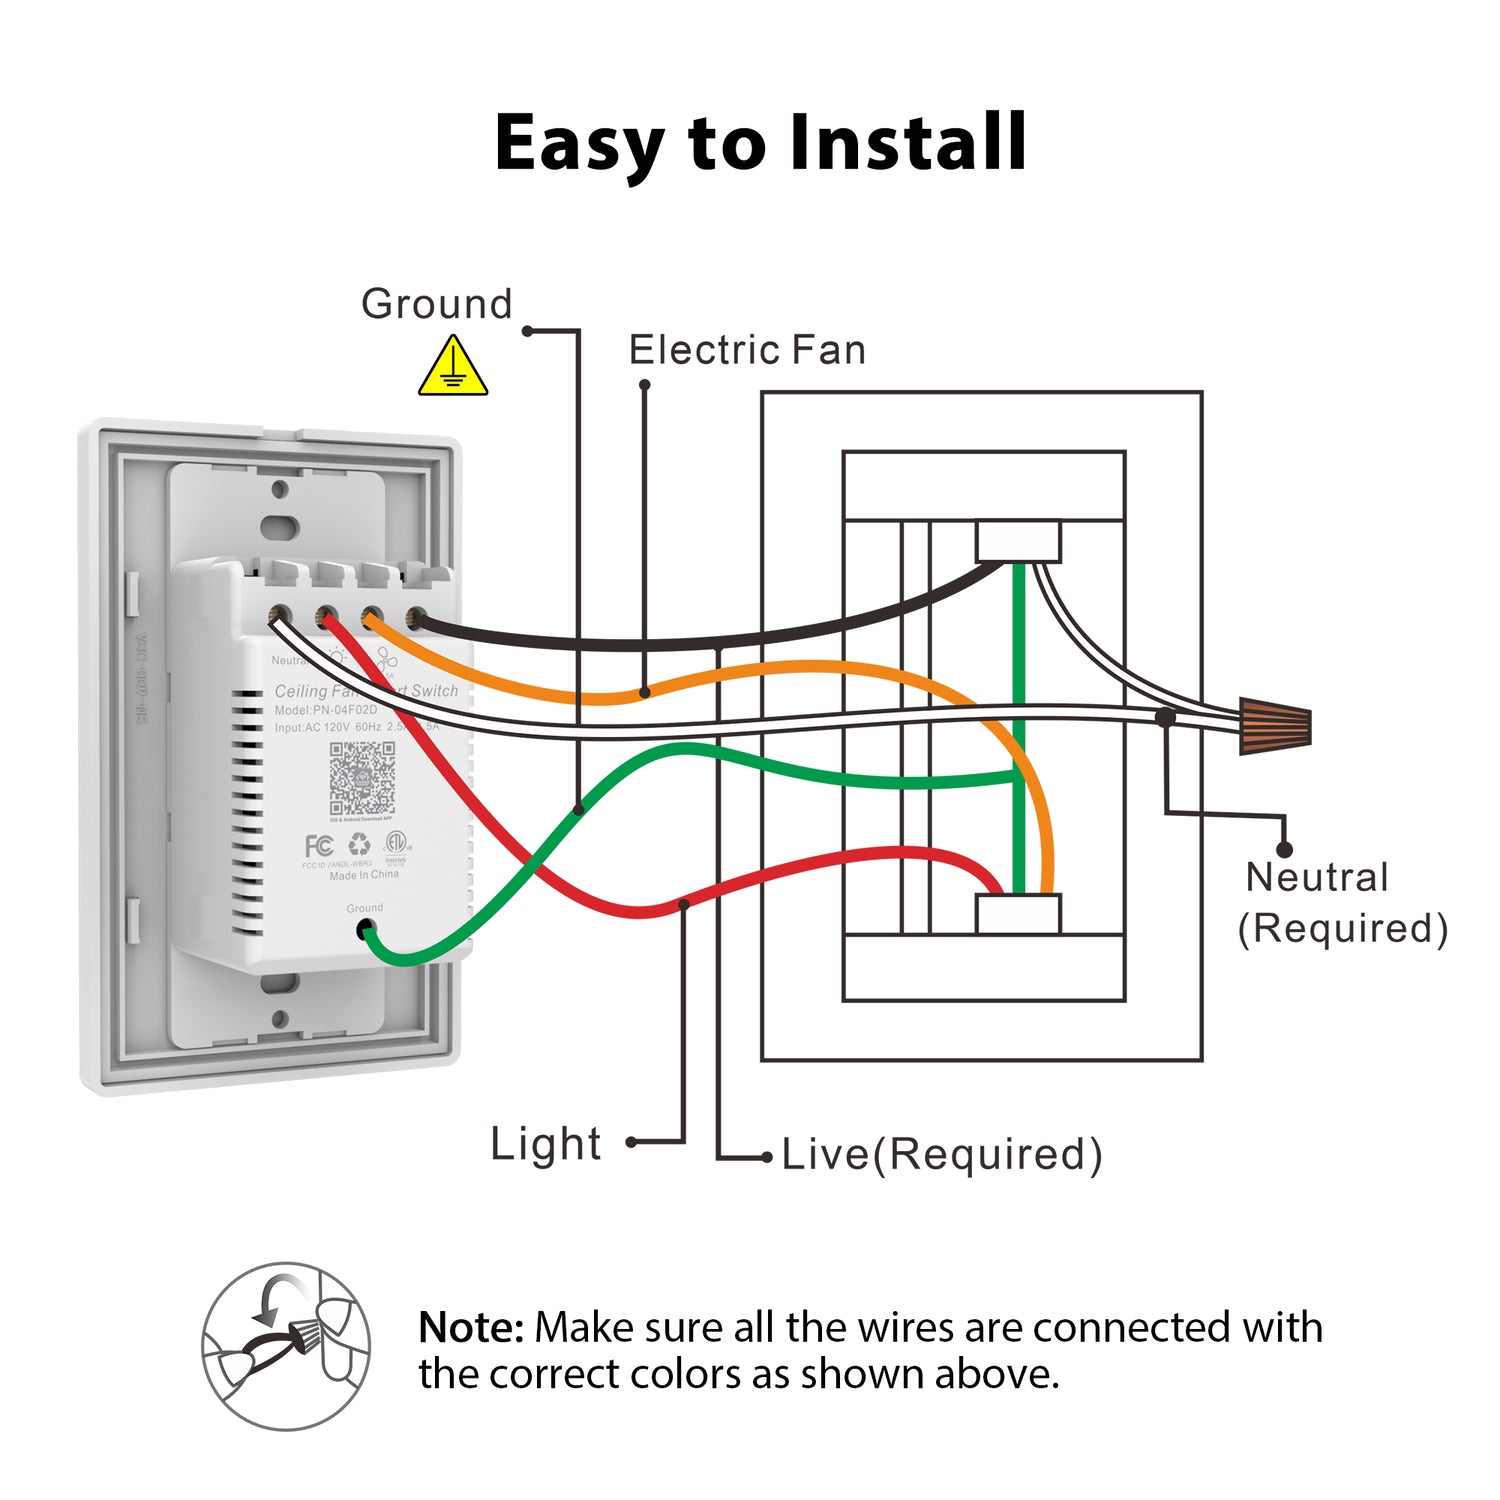 How to install a wired smart light switch